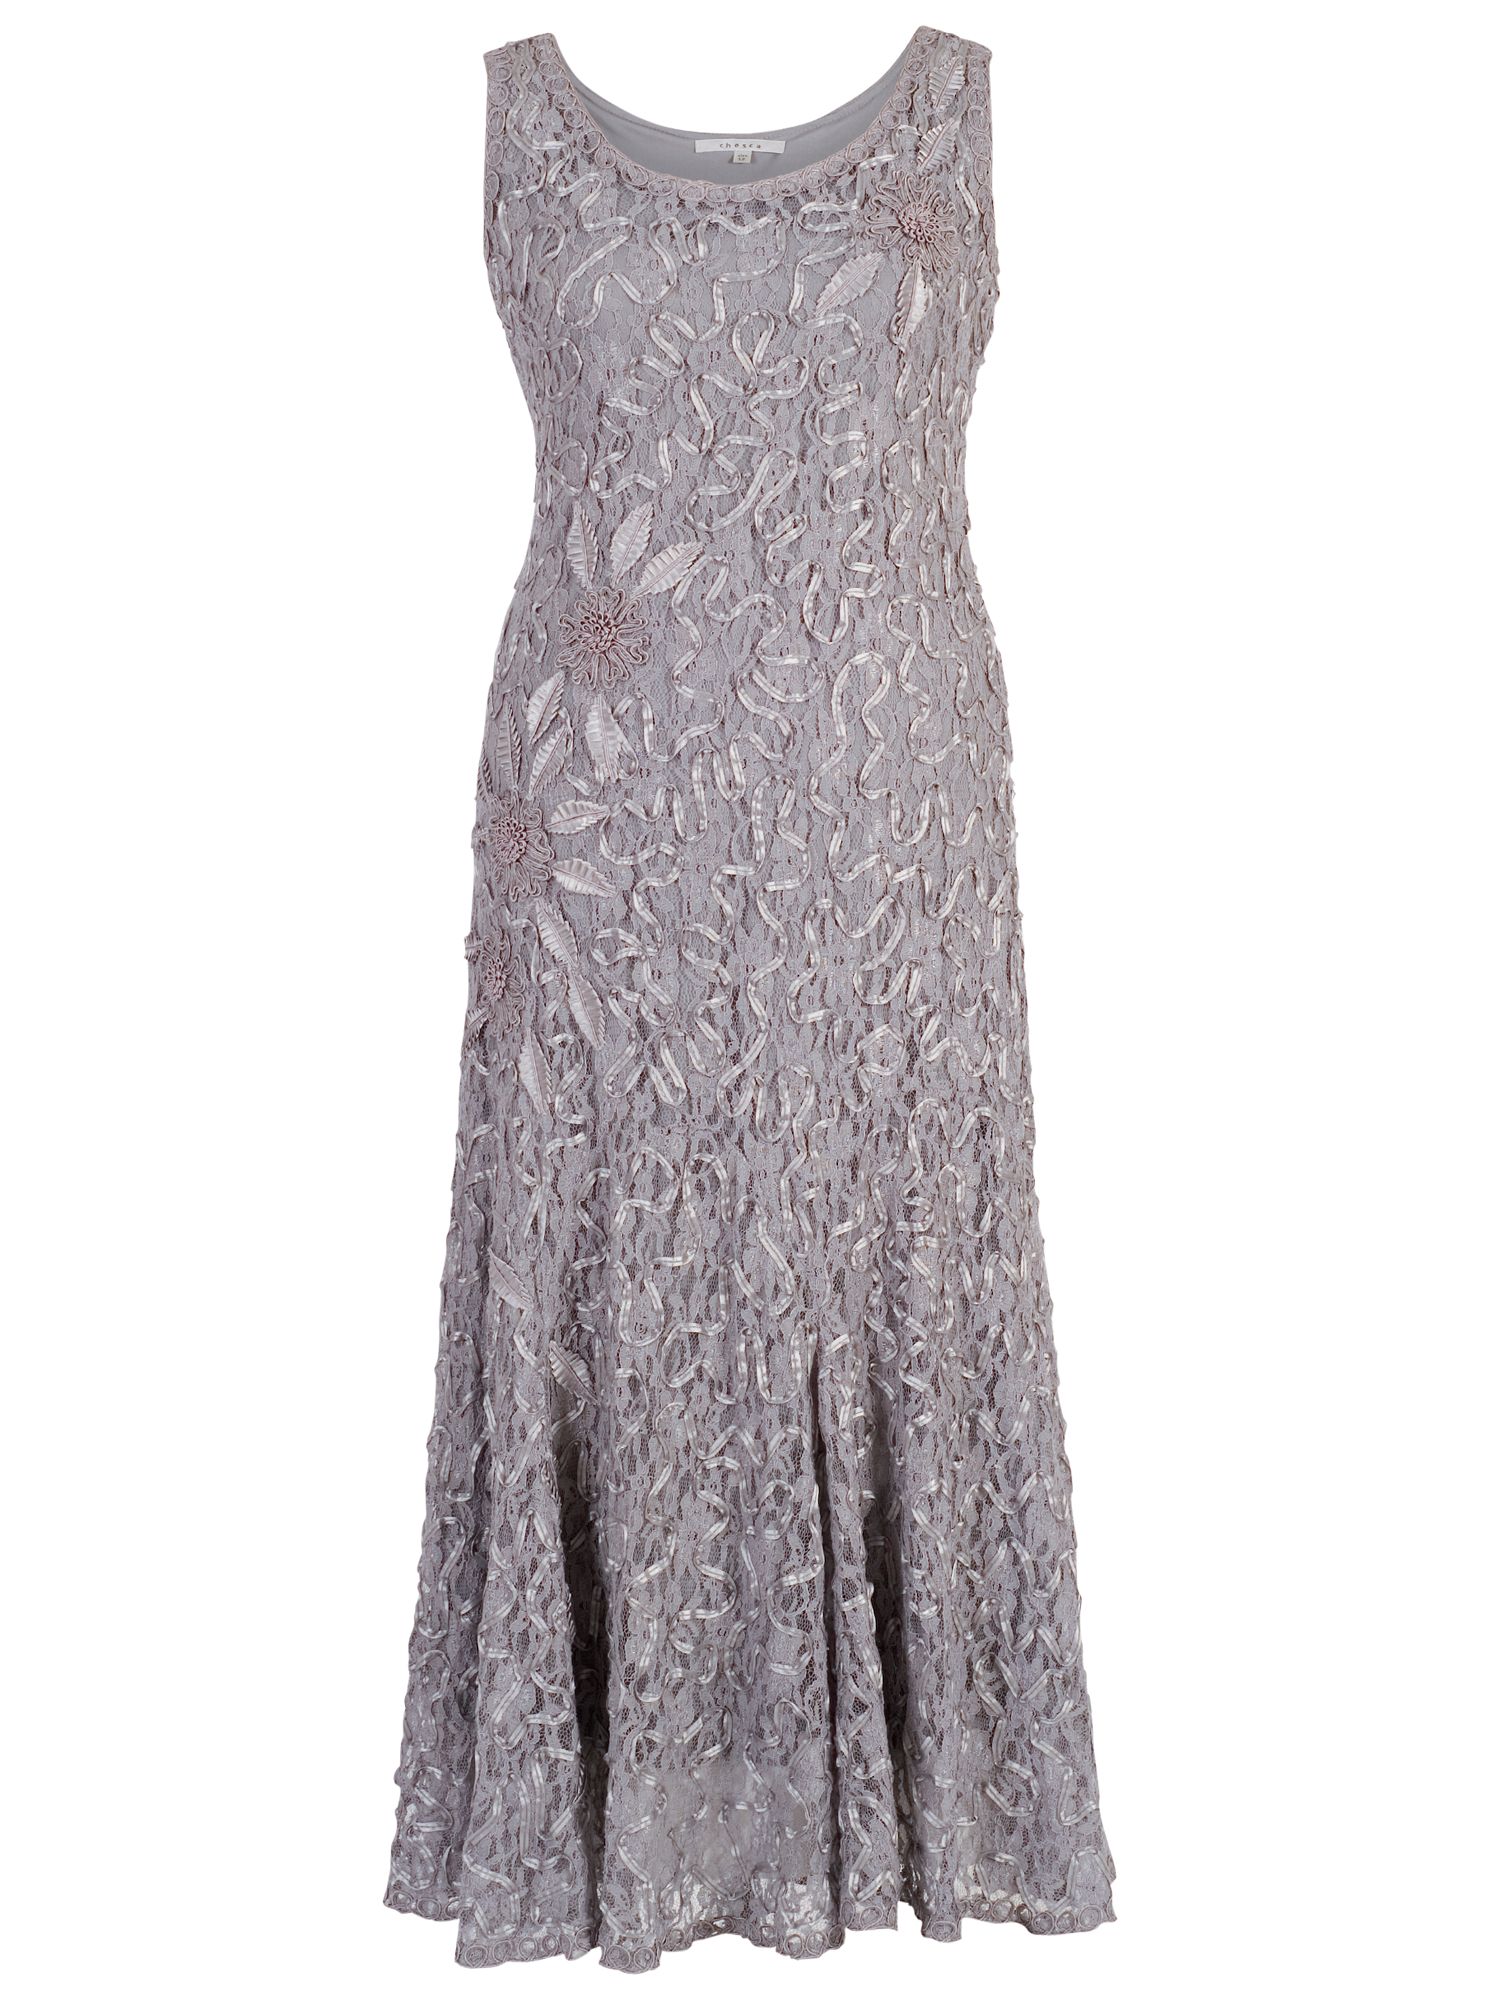 Chesca Lace Cornelli Embroidered Dress, Silver Grey at John Lewis ...